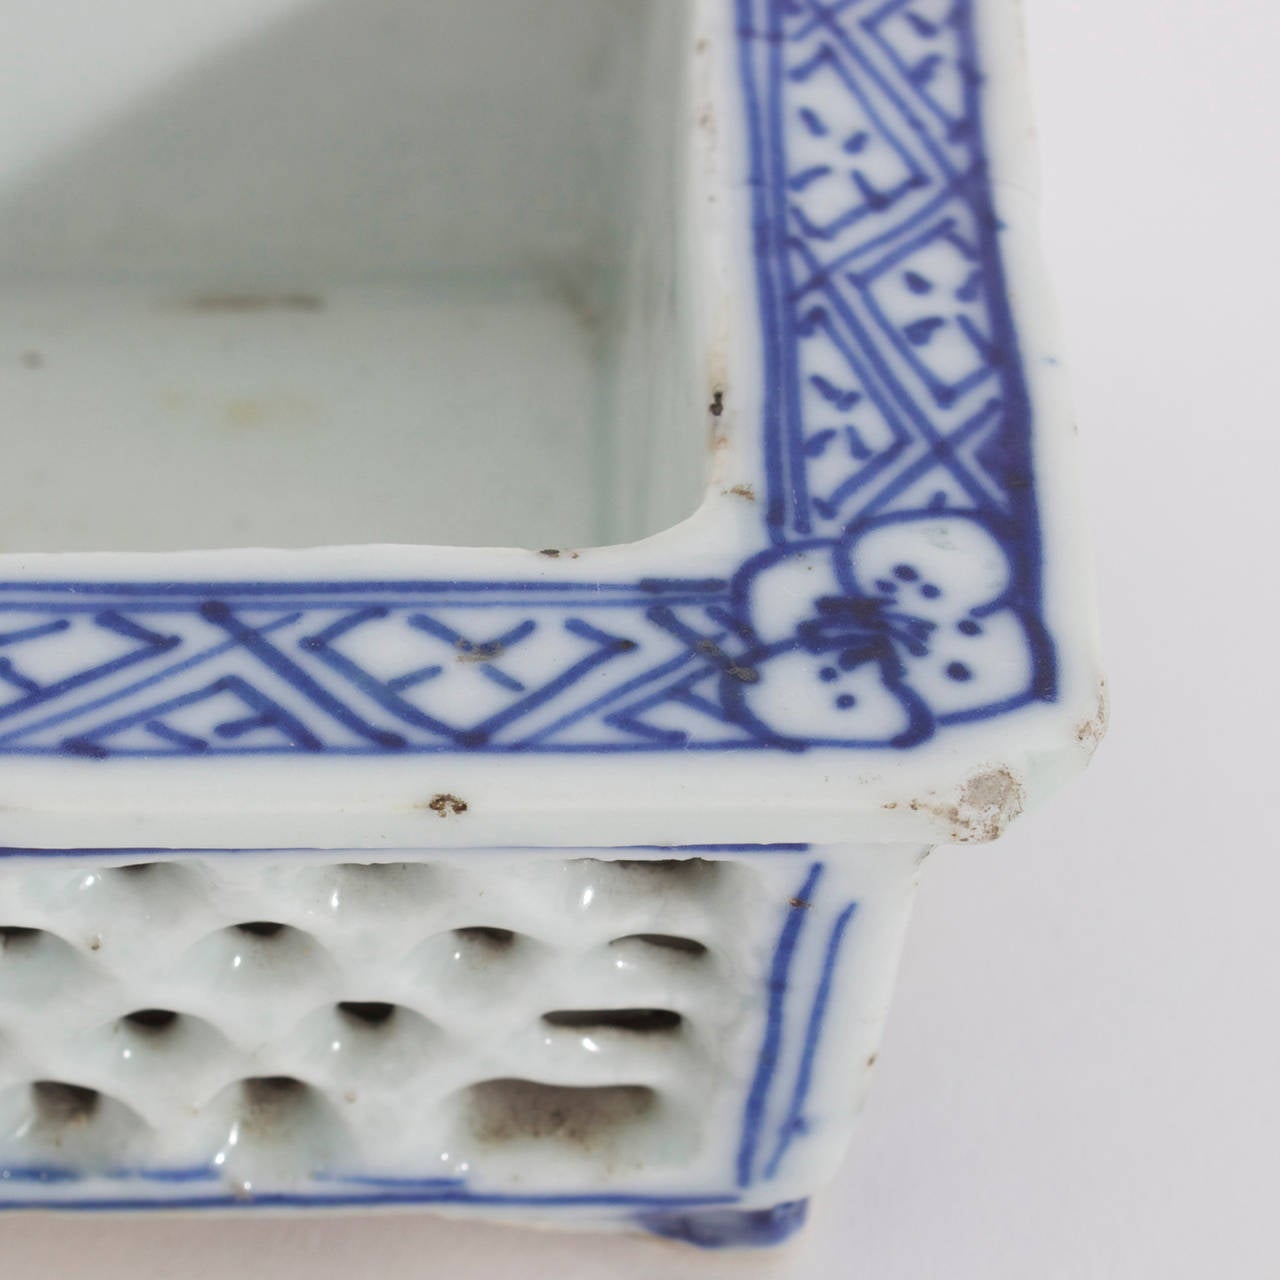 Chinese Export 19th Century Blue and White Narcissus or Bulb Tray